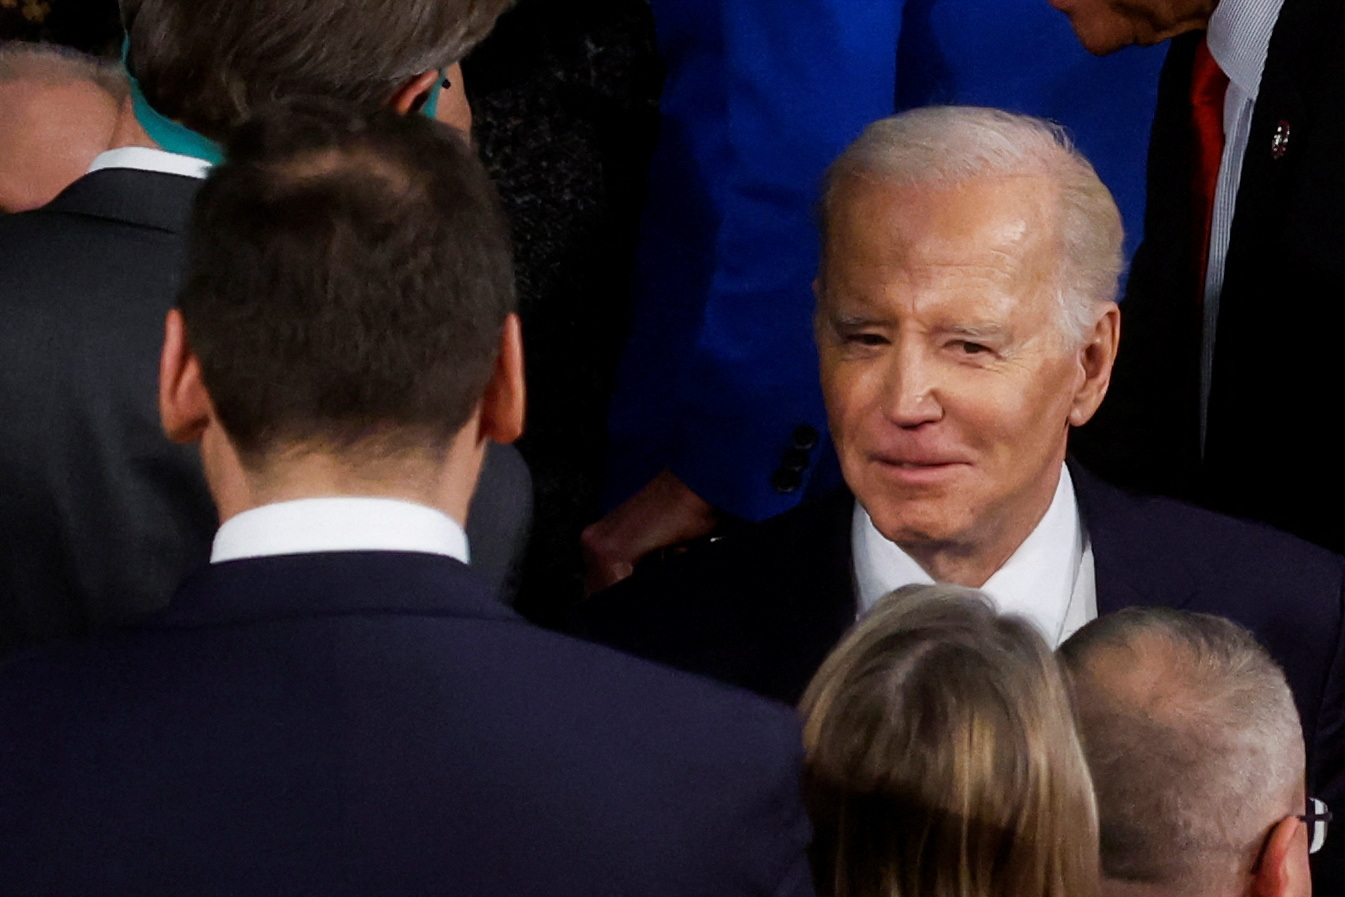 U.S. President Joe Biden arrives to deliver State of the Union address at the U.S. Capitol in Washington